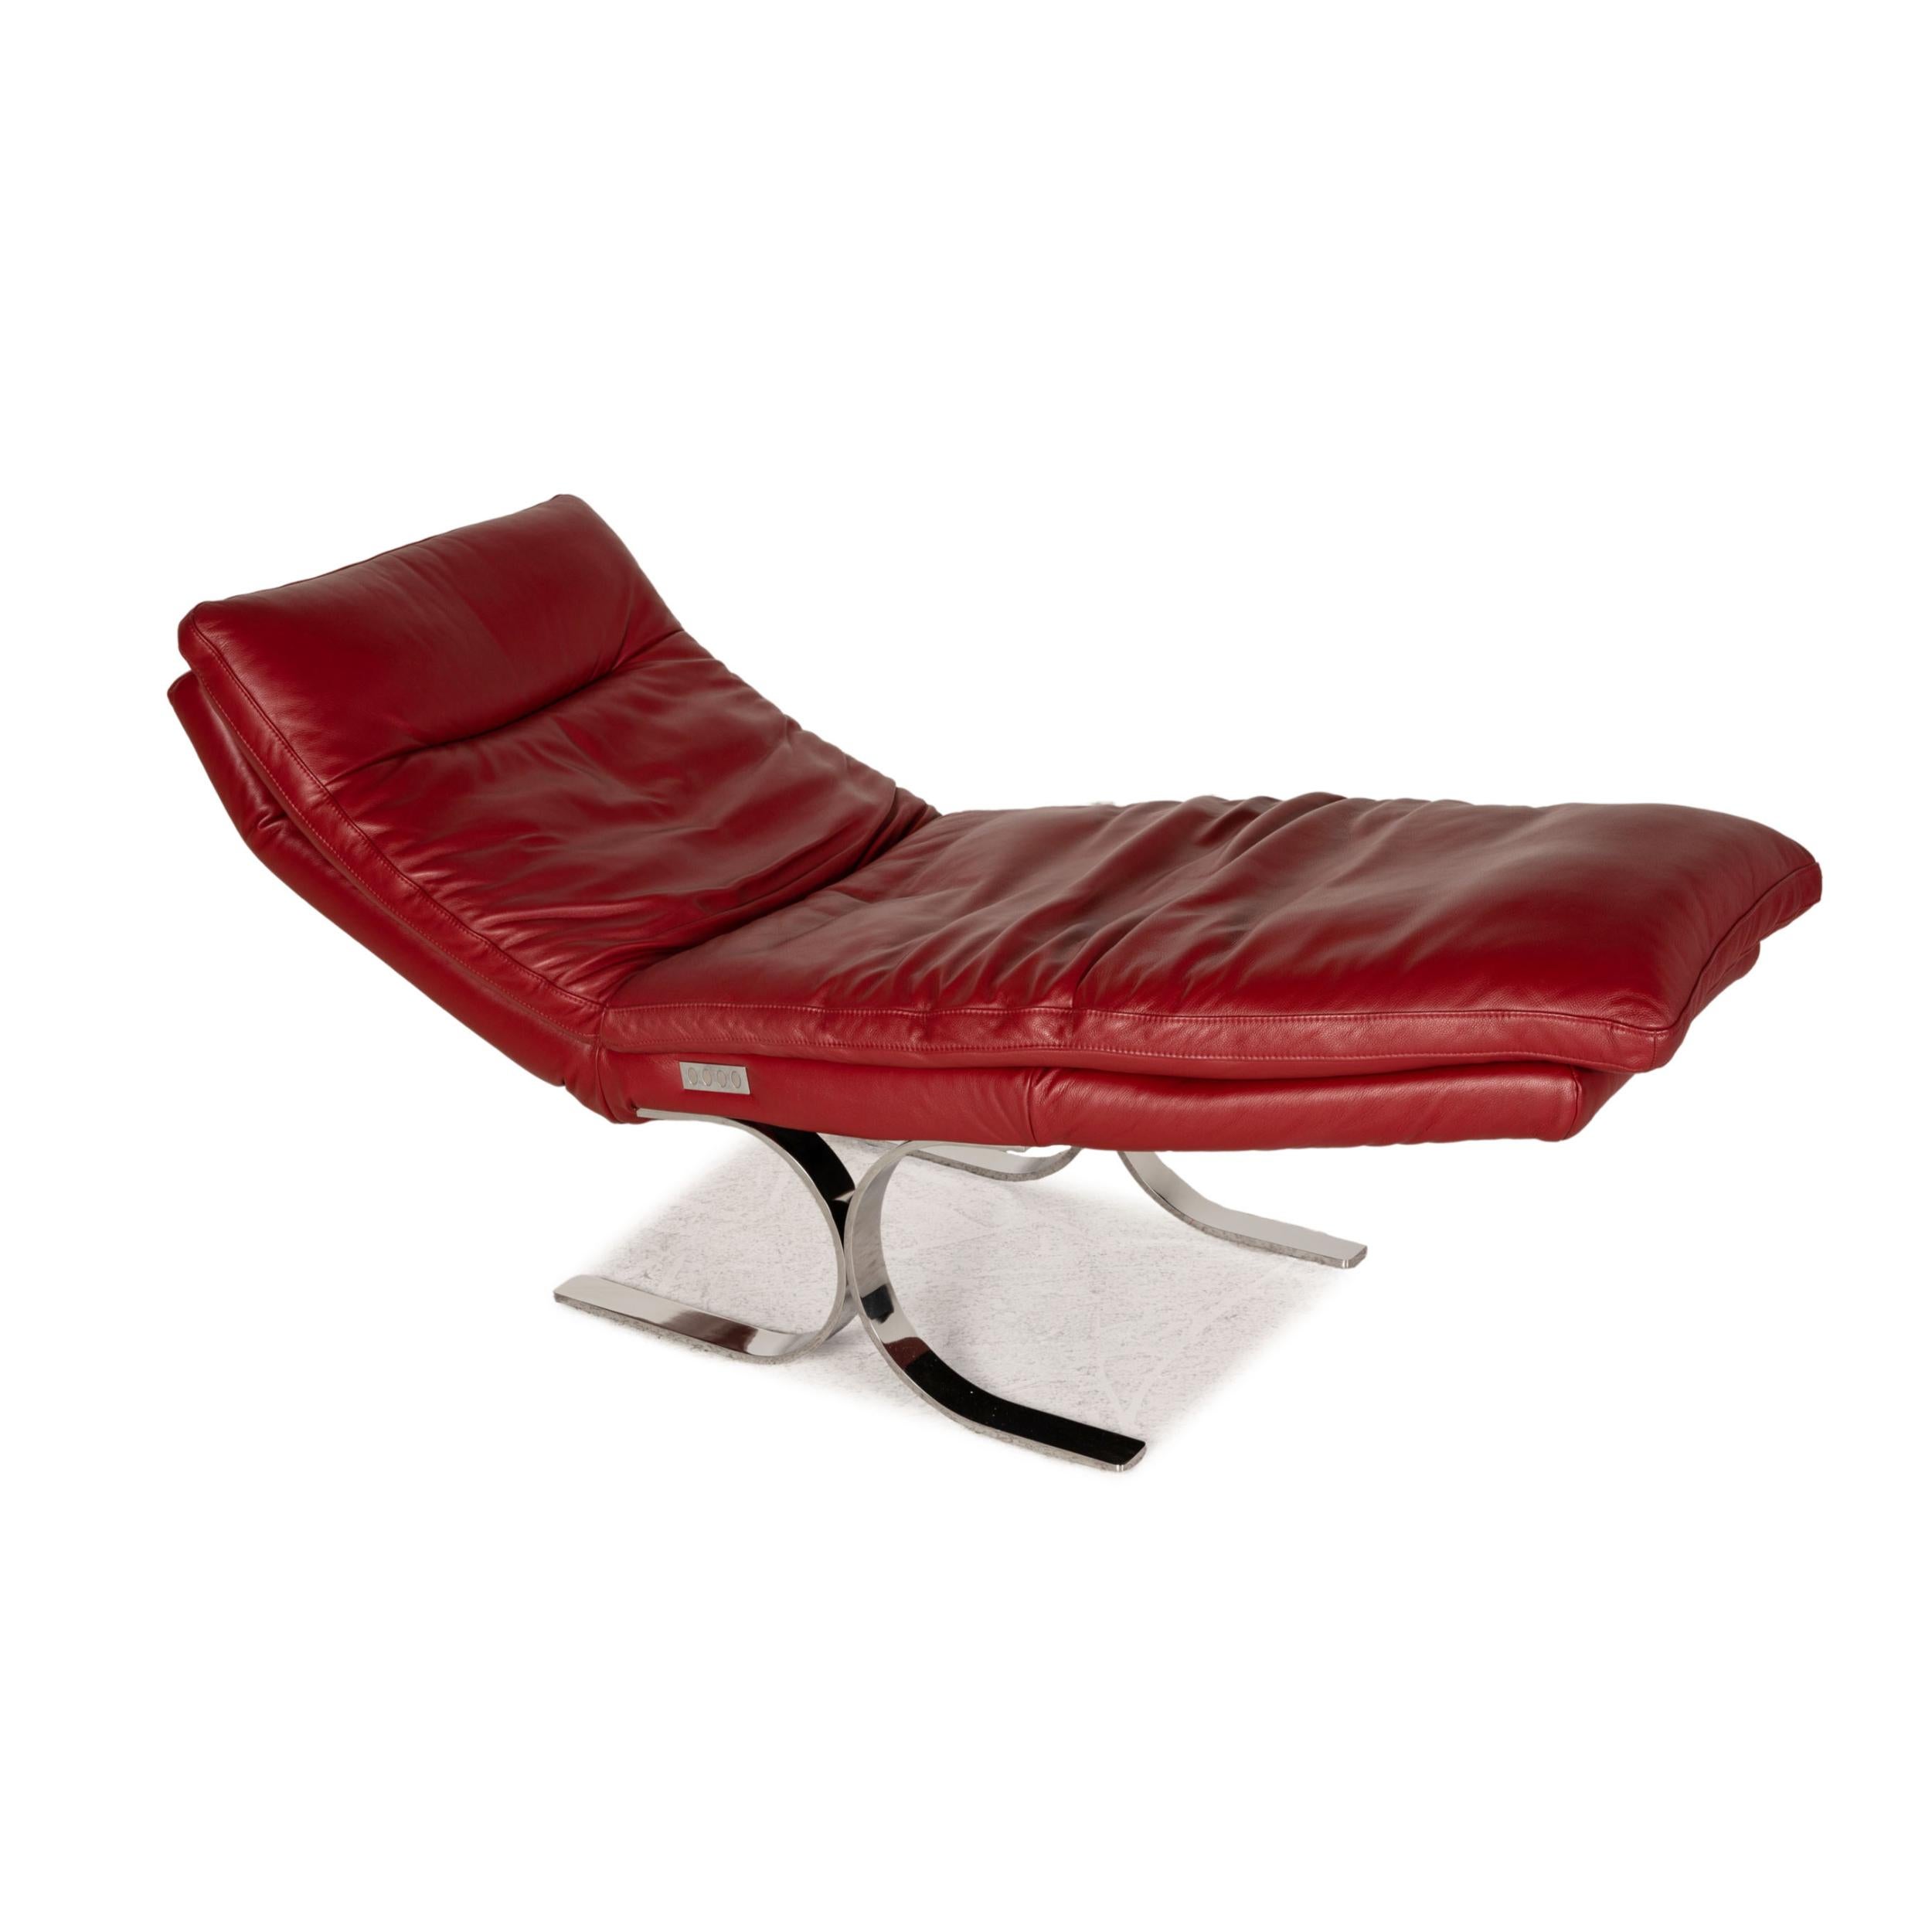 Modern Willi Schillig Daily Dreams Leather Lounger Red Function Relaxation Function For Sale